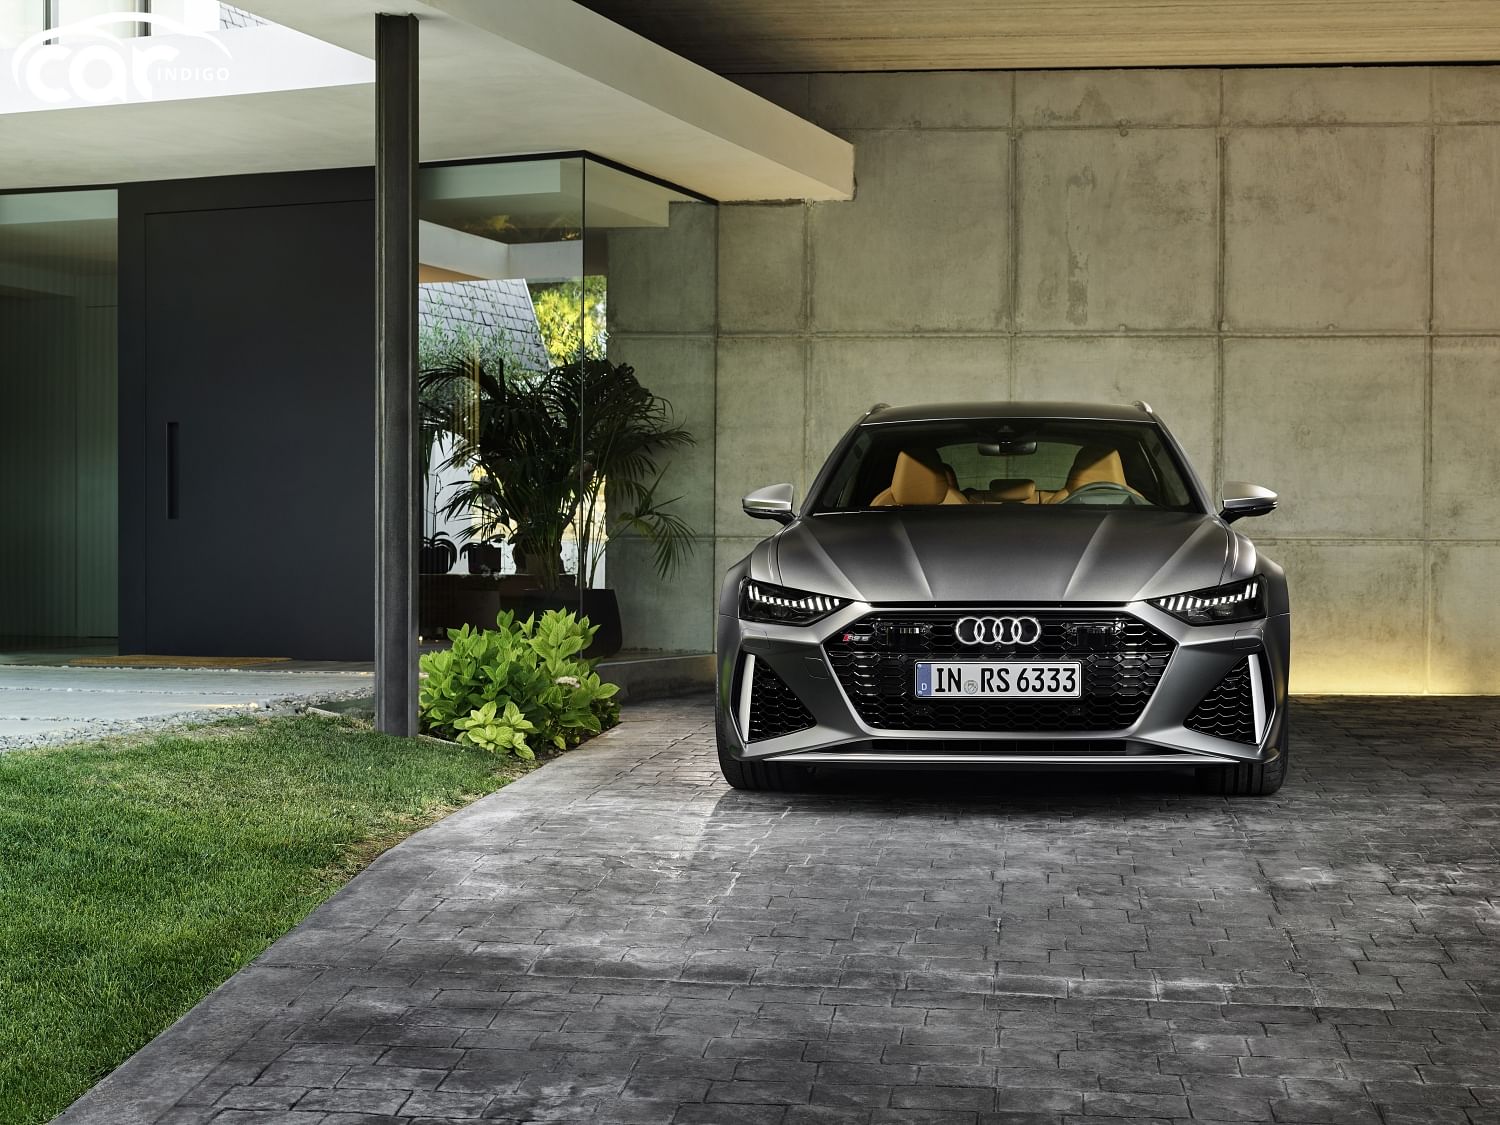 2021 Audi Rs 6 Avant Price Review Ratings And Pictures Carindigo Com